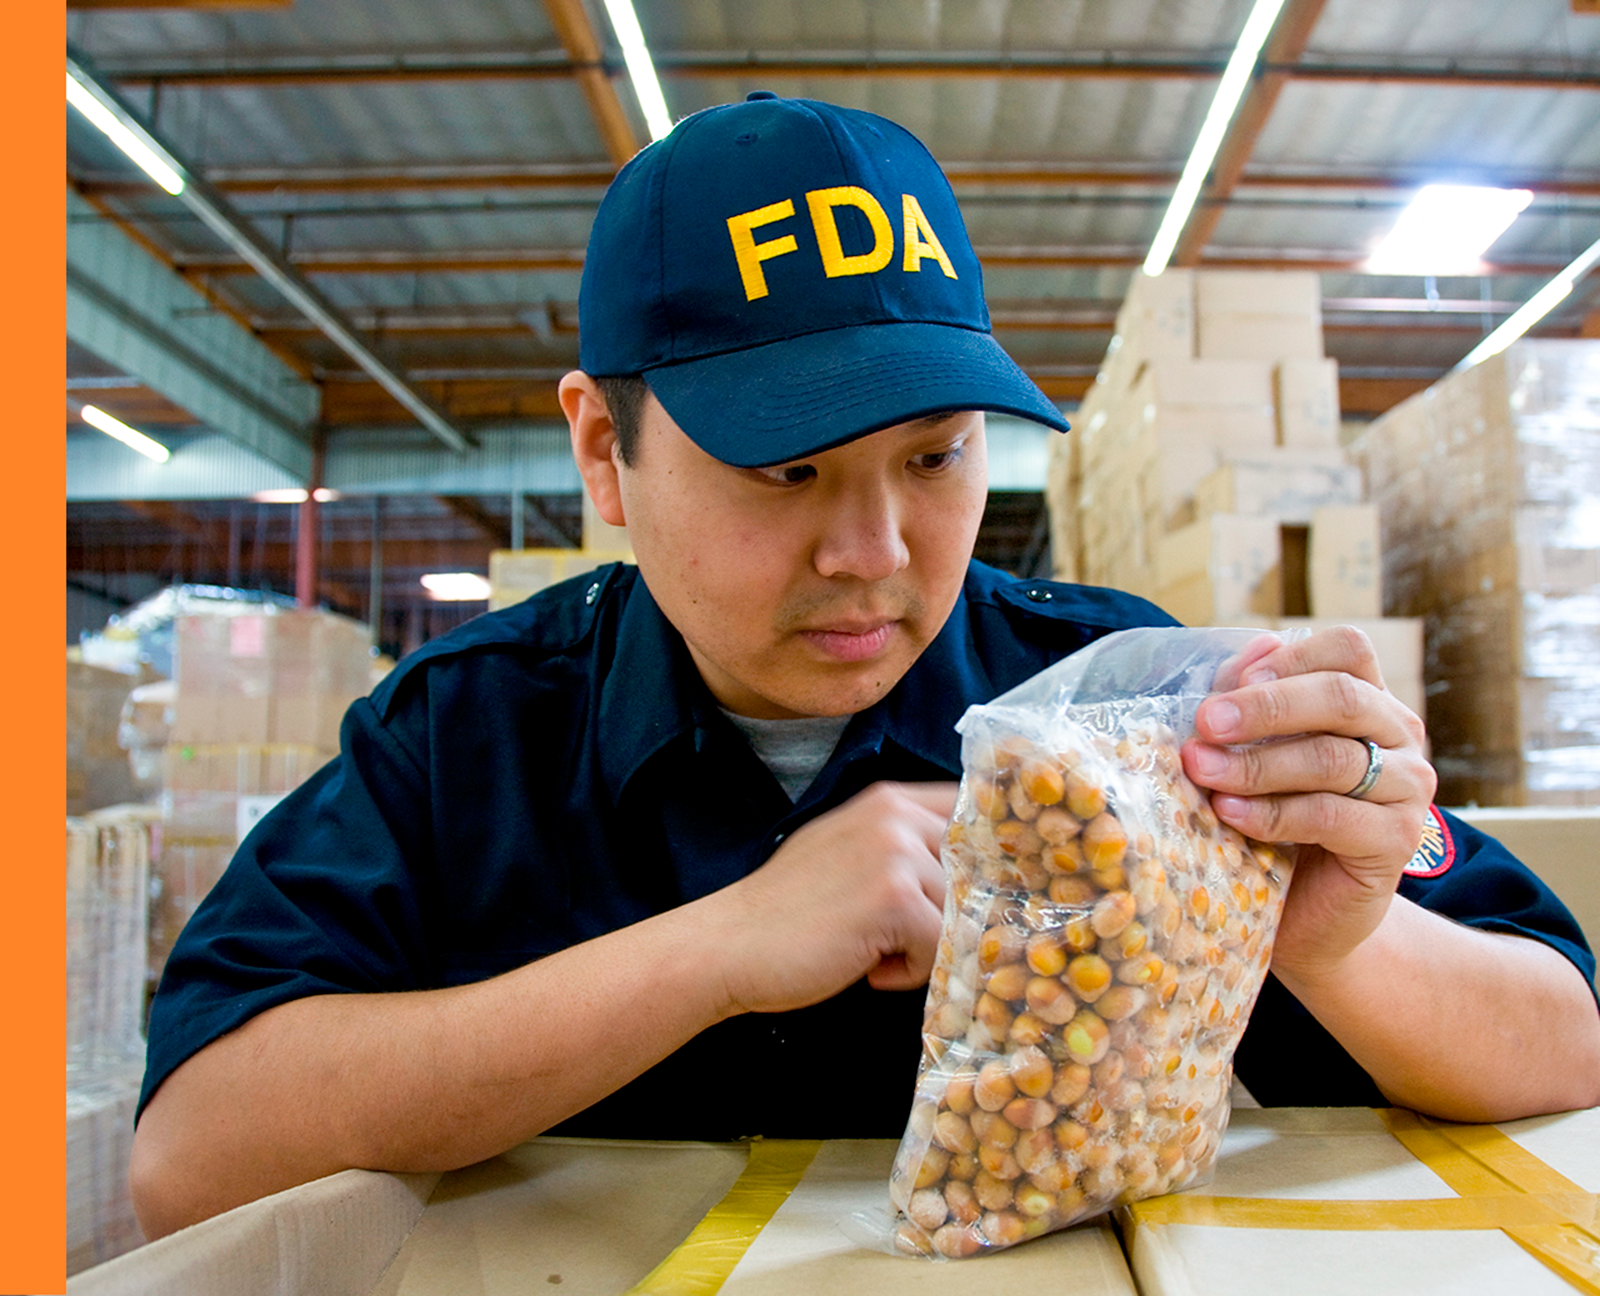 FDA inspector inspects bag of food in warehouse